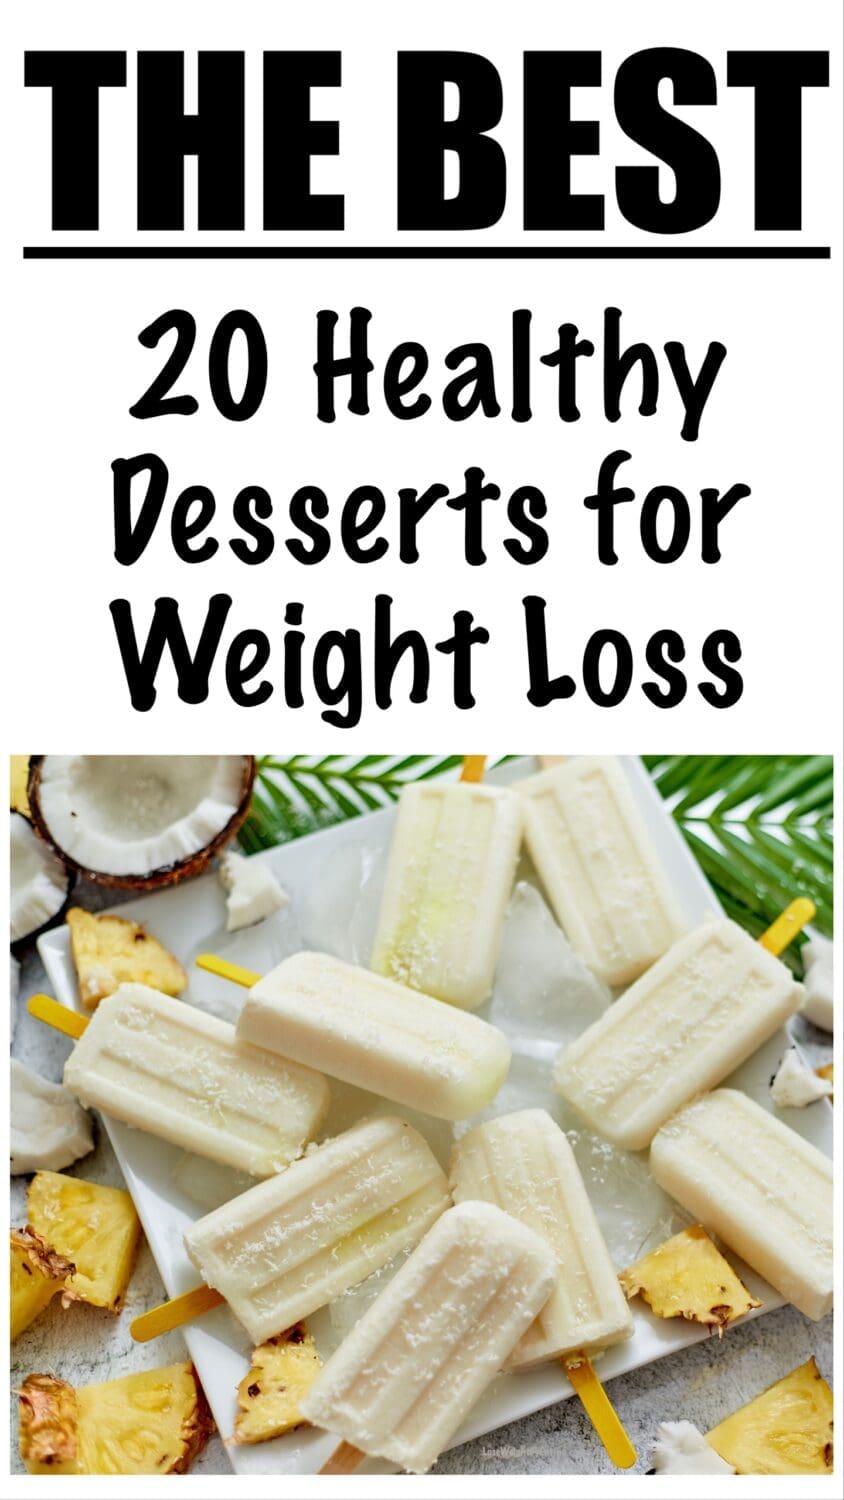 20 Low Calorie Healthy Desserts for Weight Loss